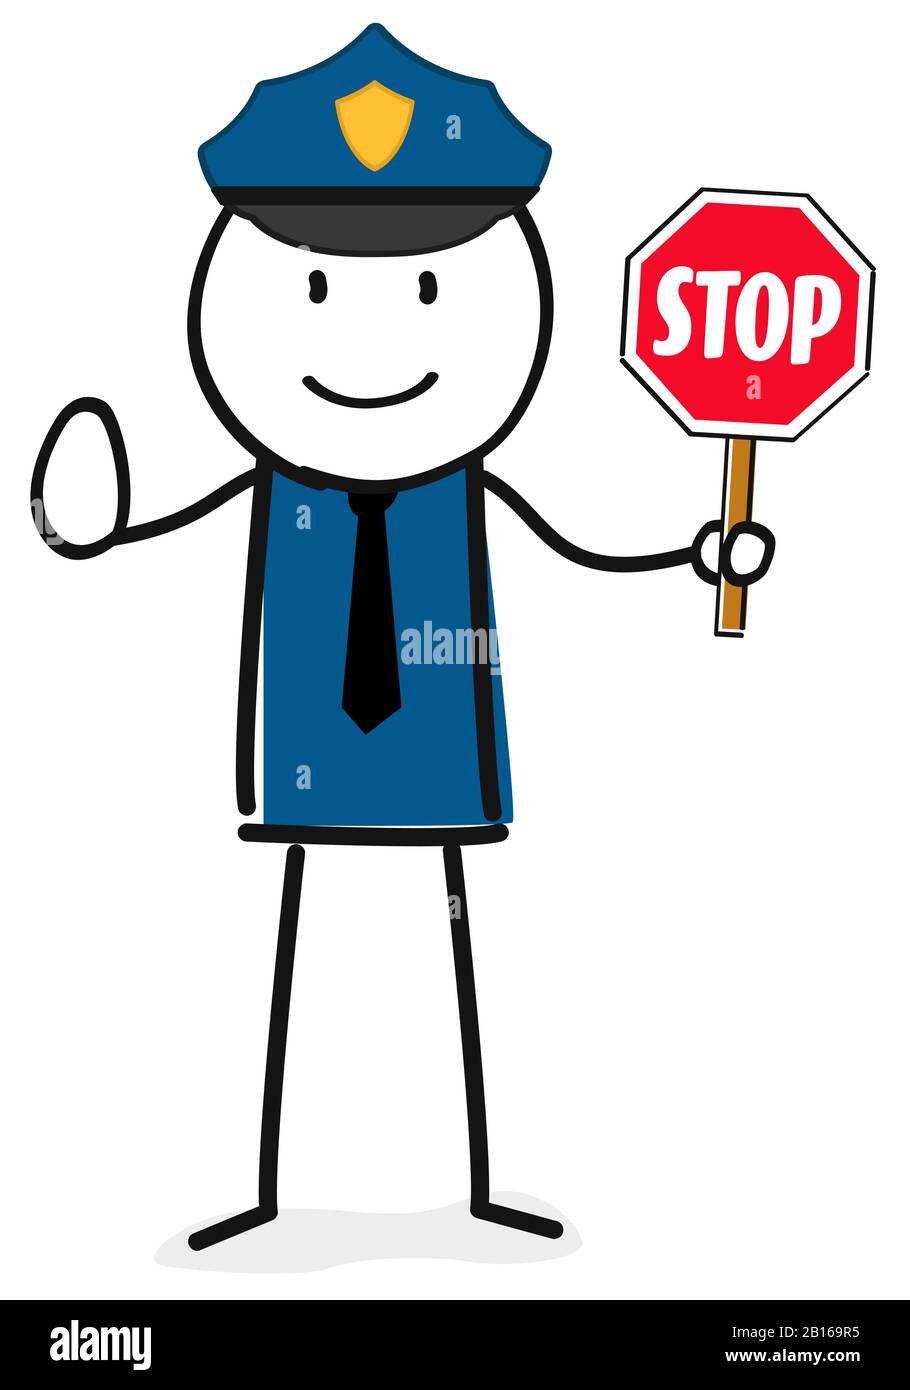 police officer with stop sign Stock Vector